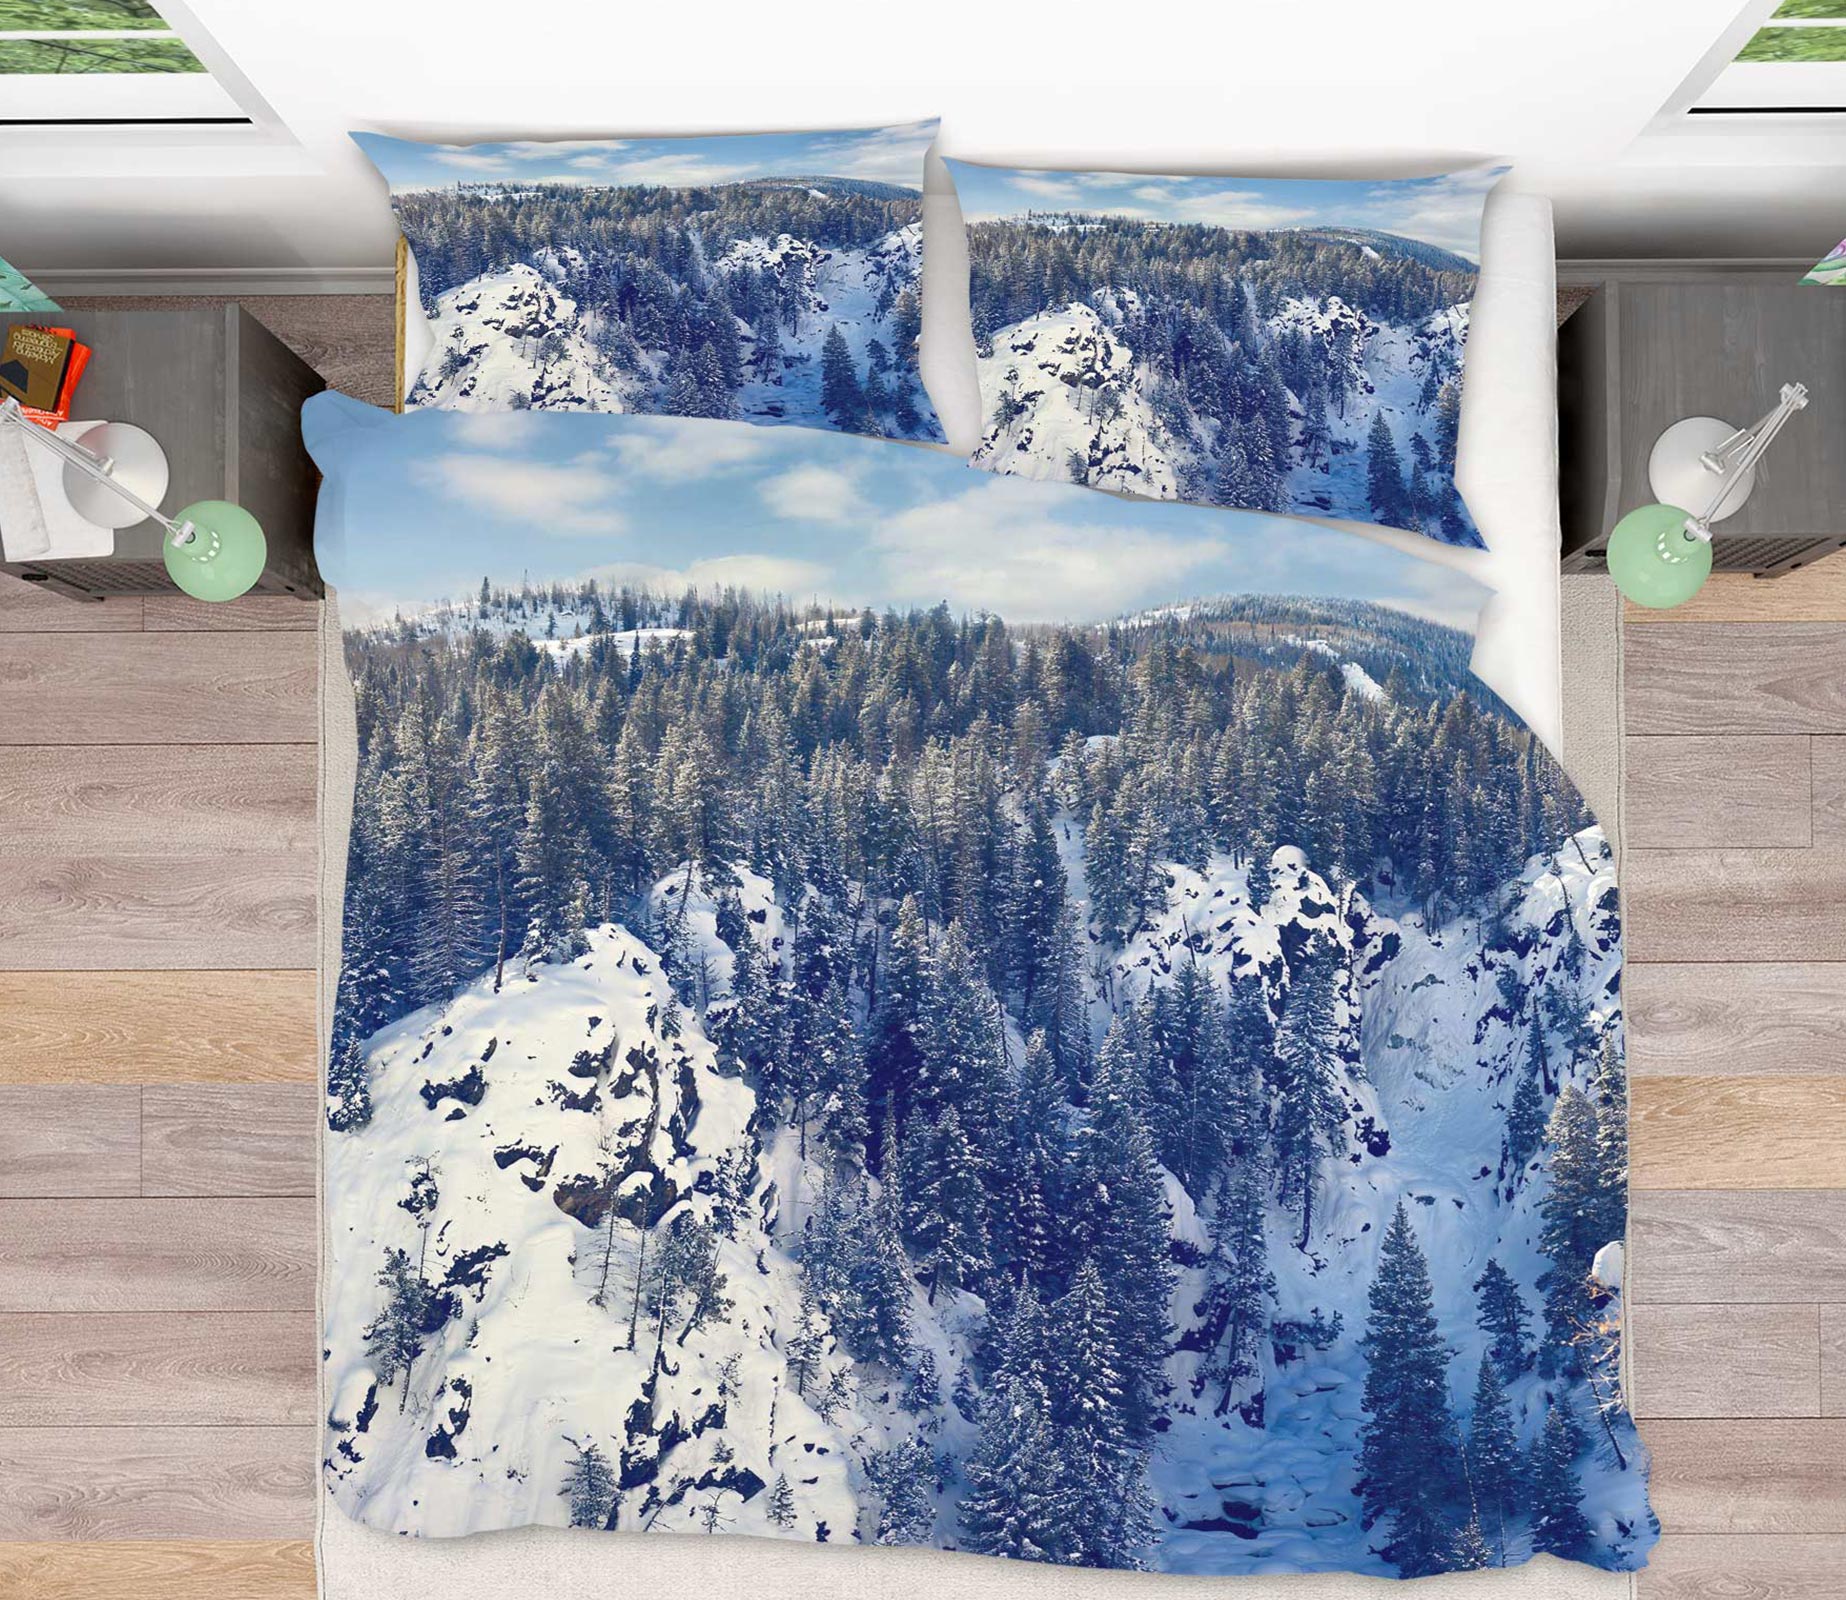 3D Snow Mountain Forest 8535 Beth Sheridan Bedding Bed Pillowcases Quilt